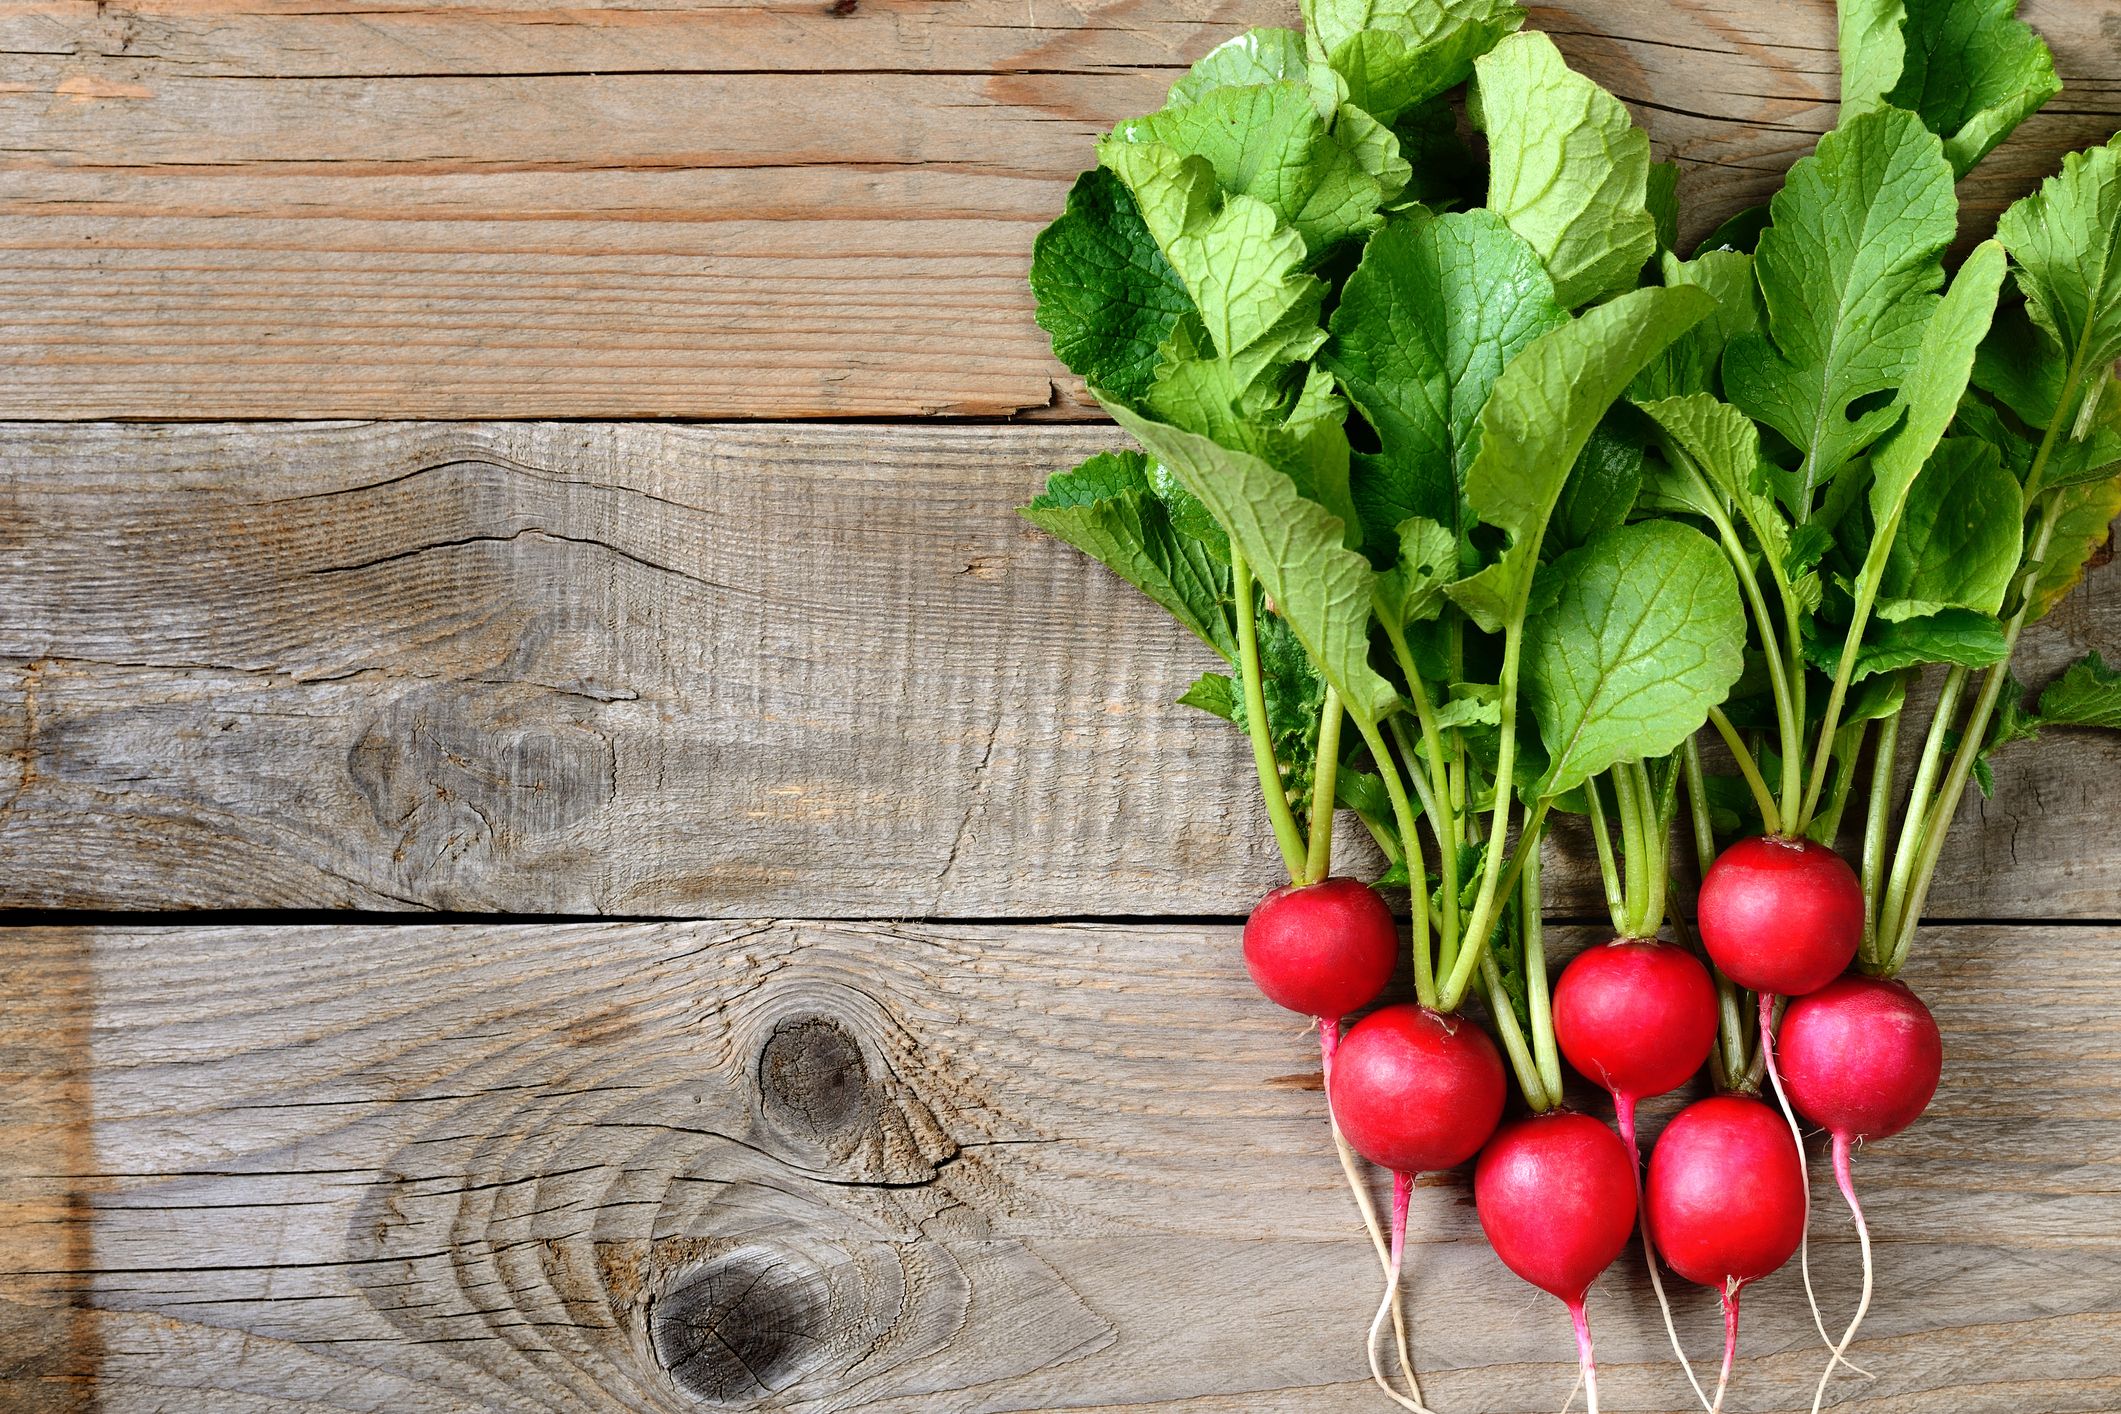 What Are Radishes Good For? A Guide To Radishes